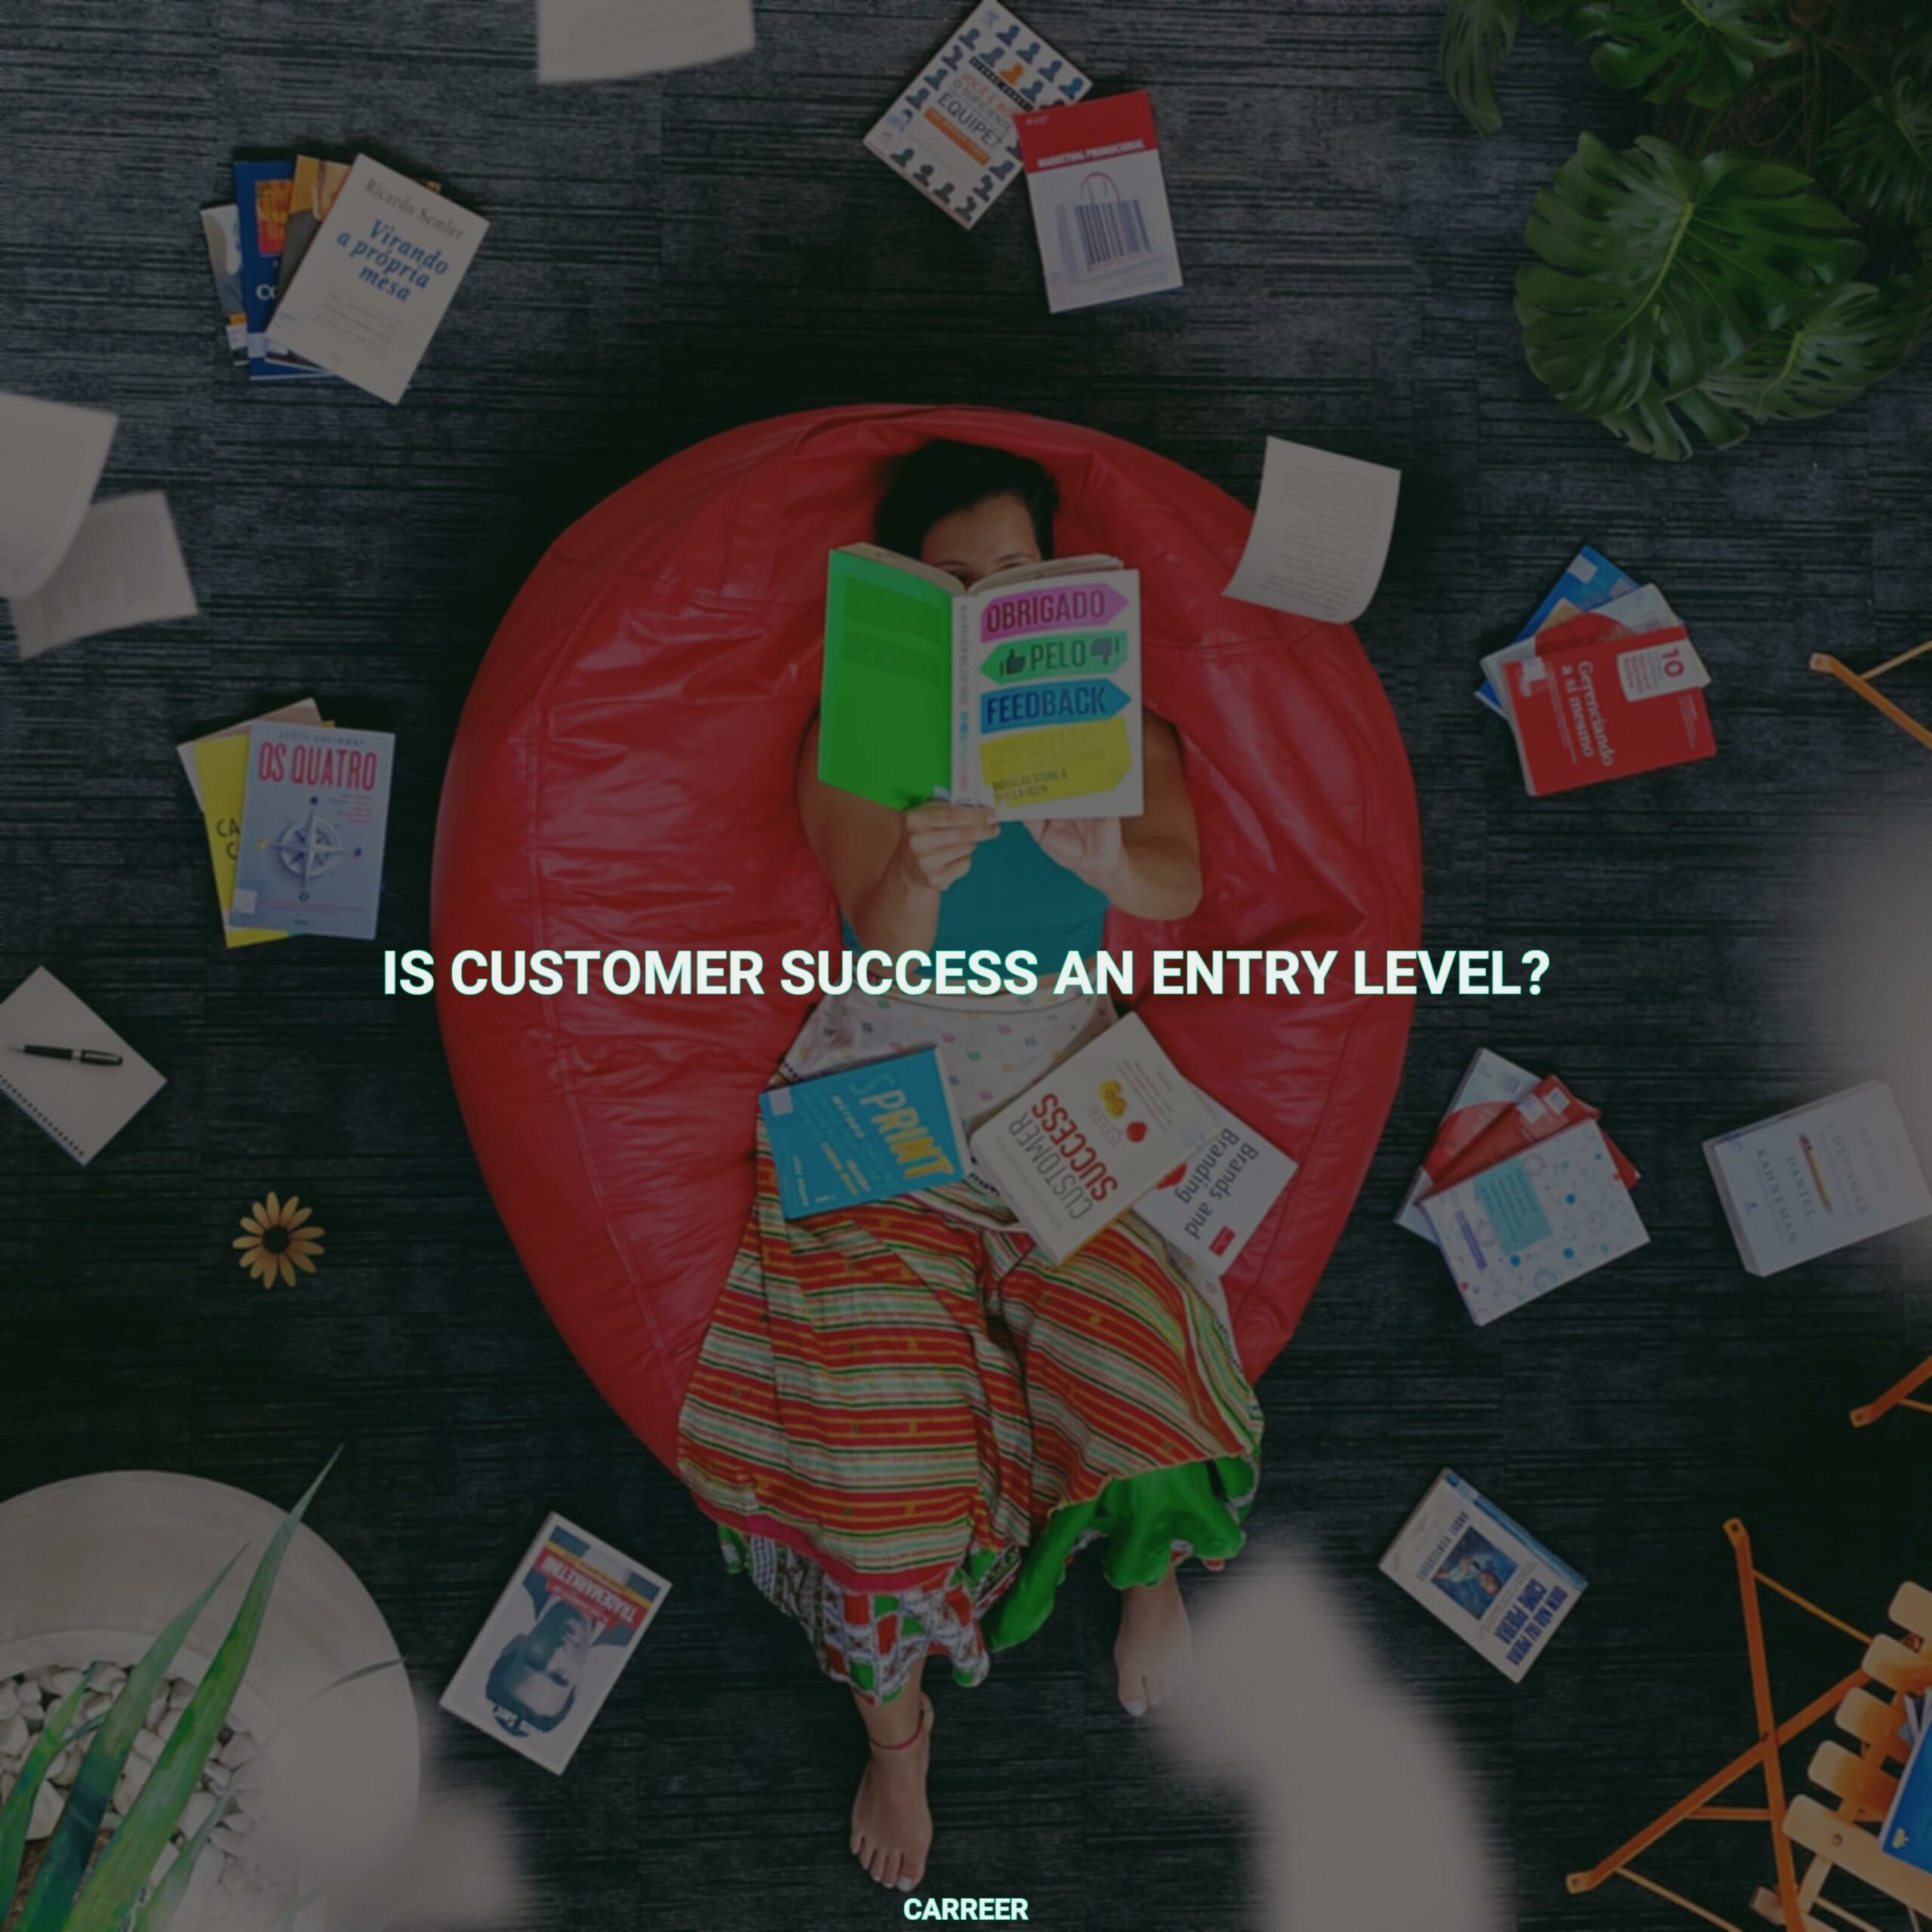 Is customer success an entry level?